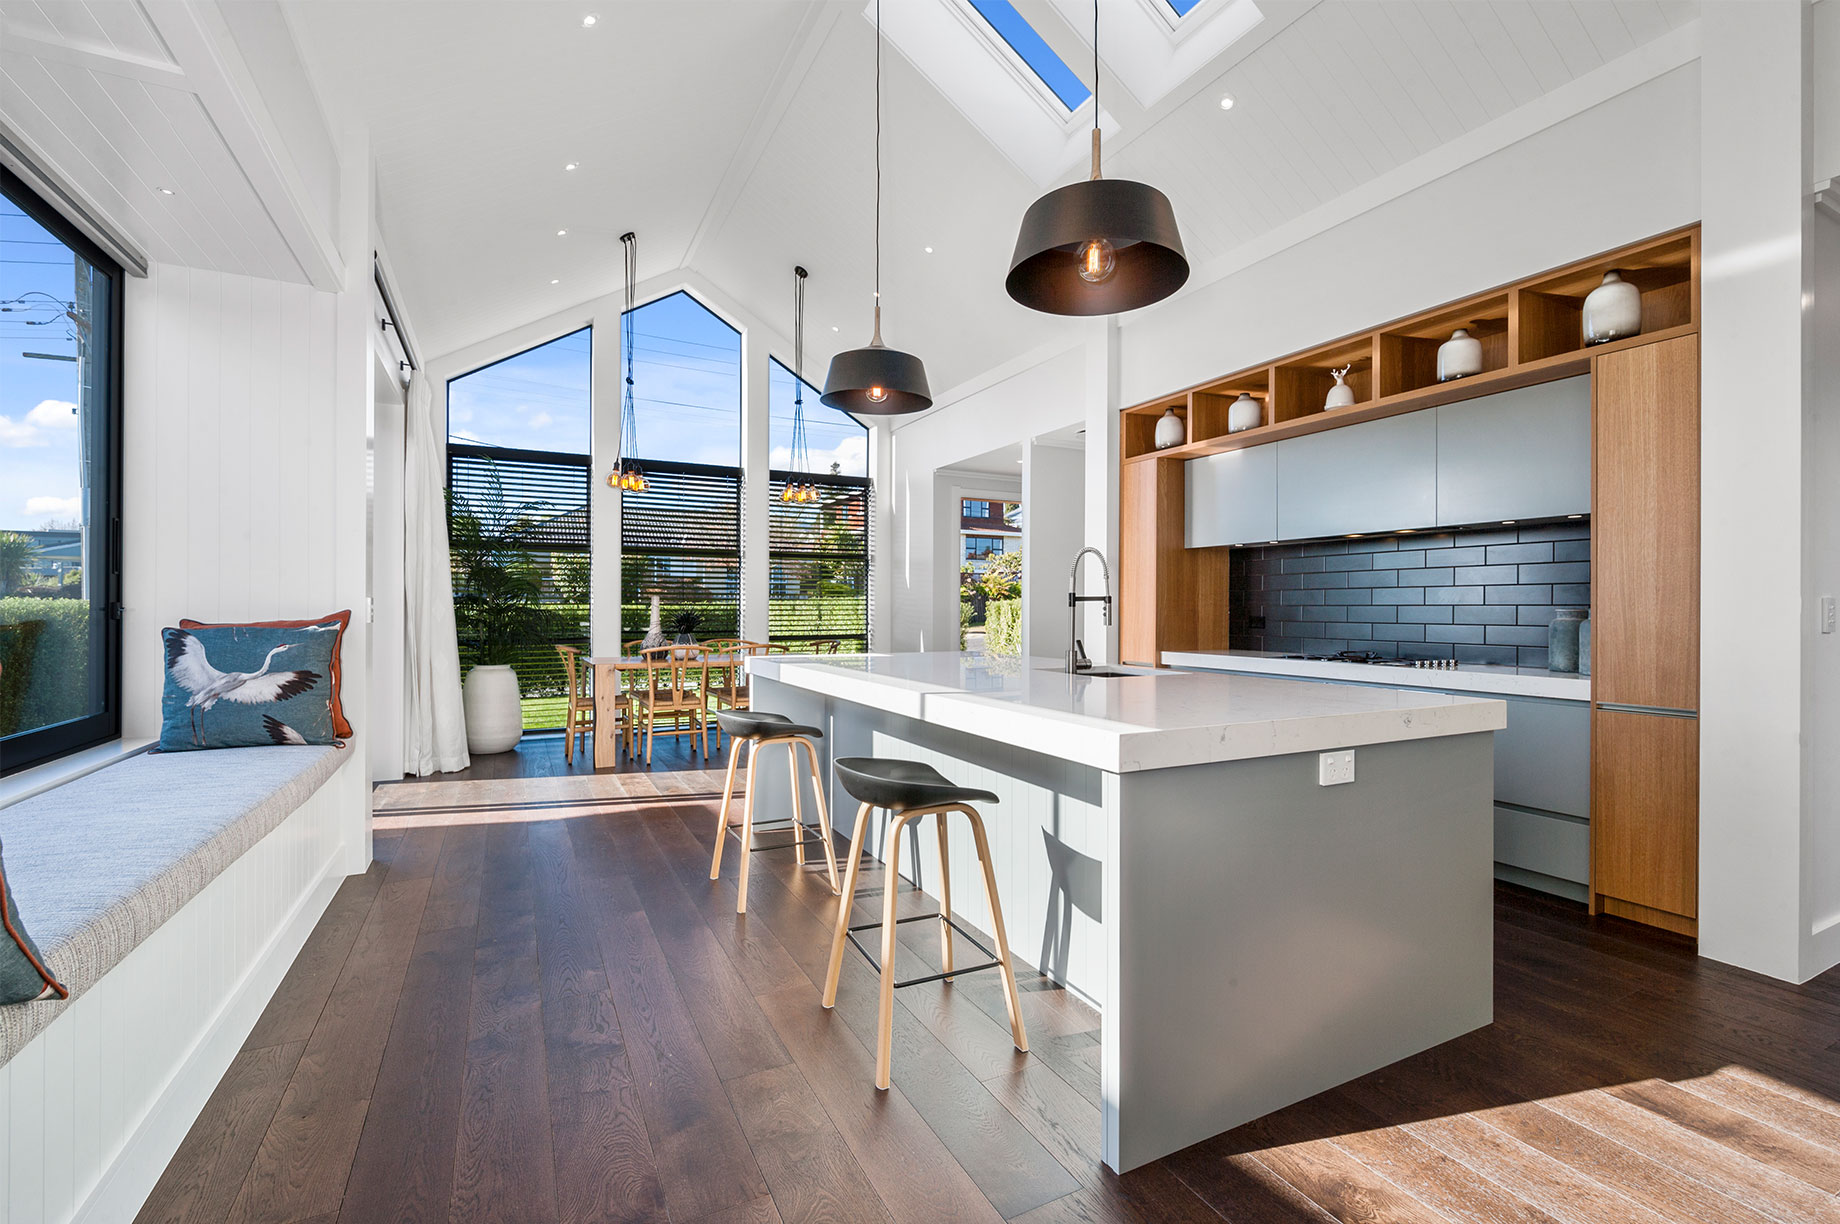 Kitchen and dining area with floor-to-ceiling windows interior